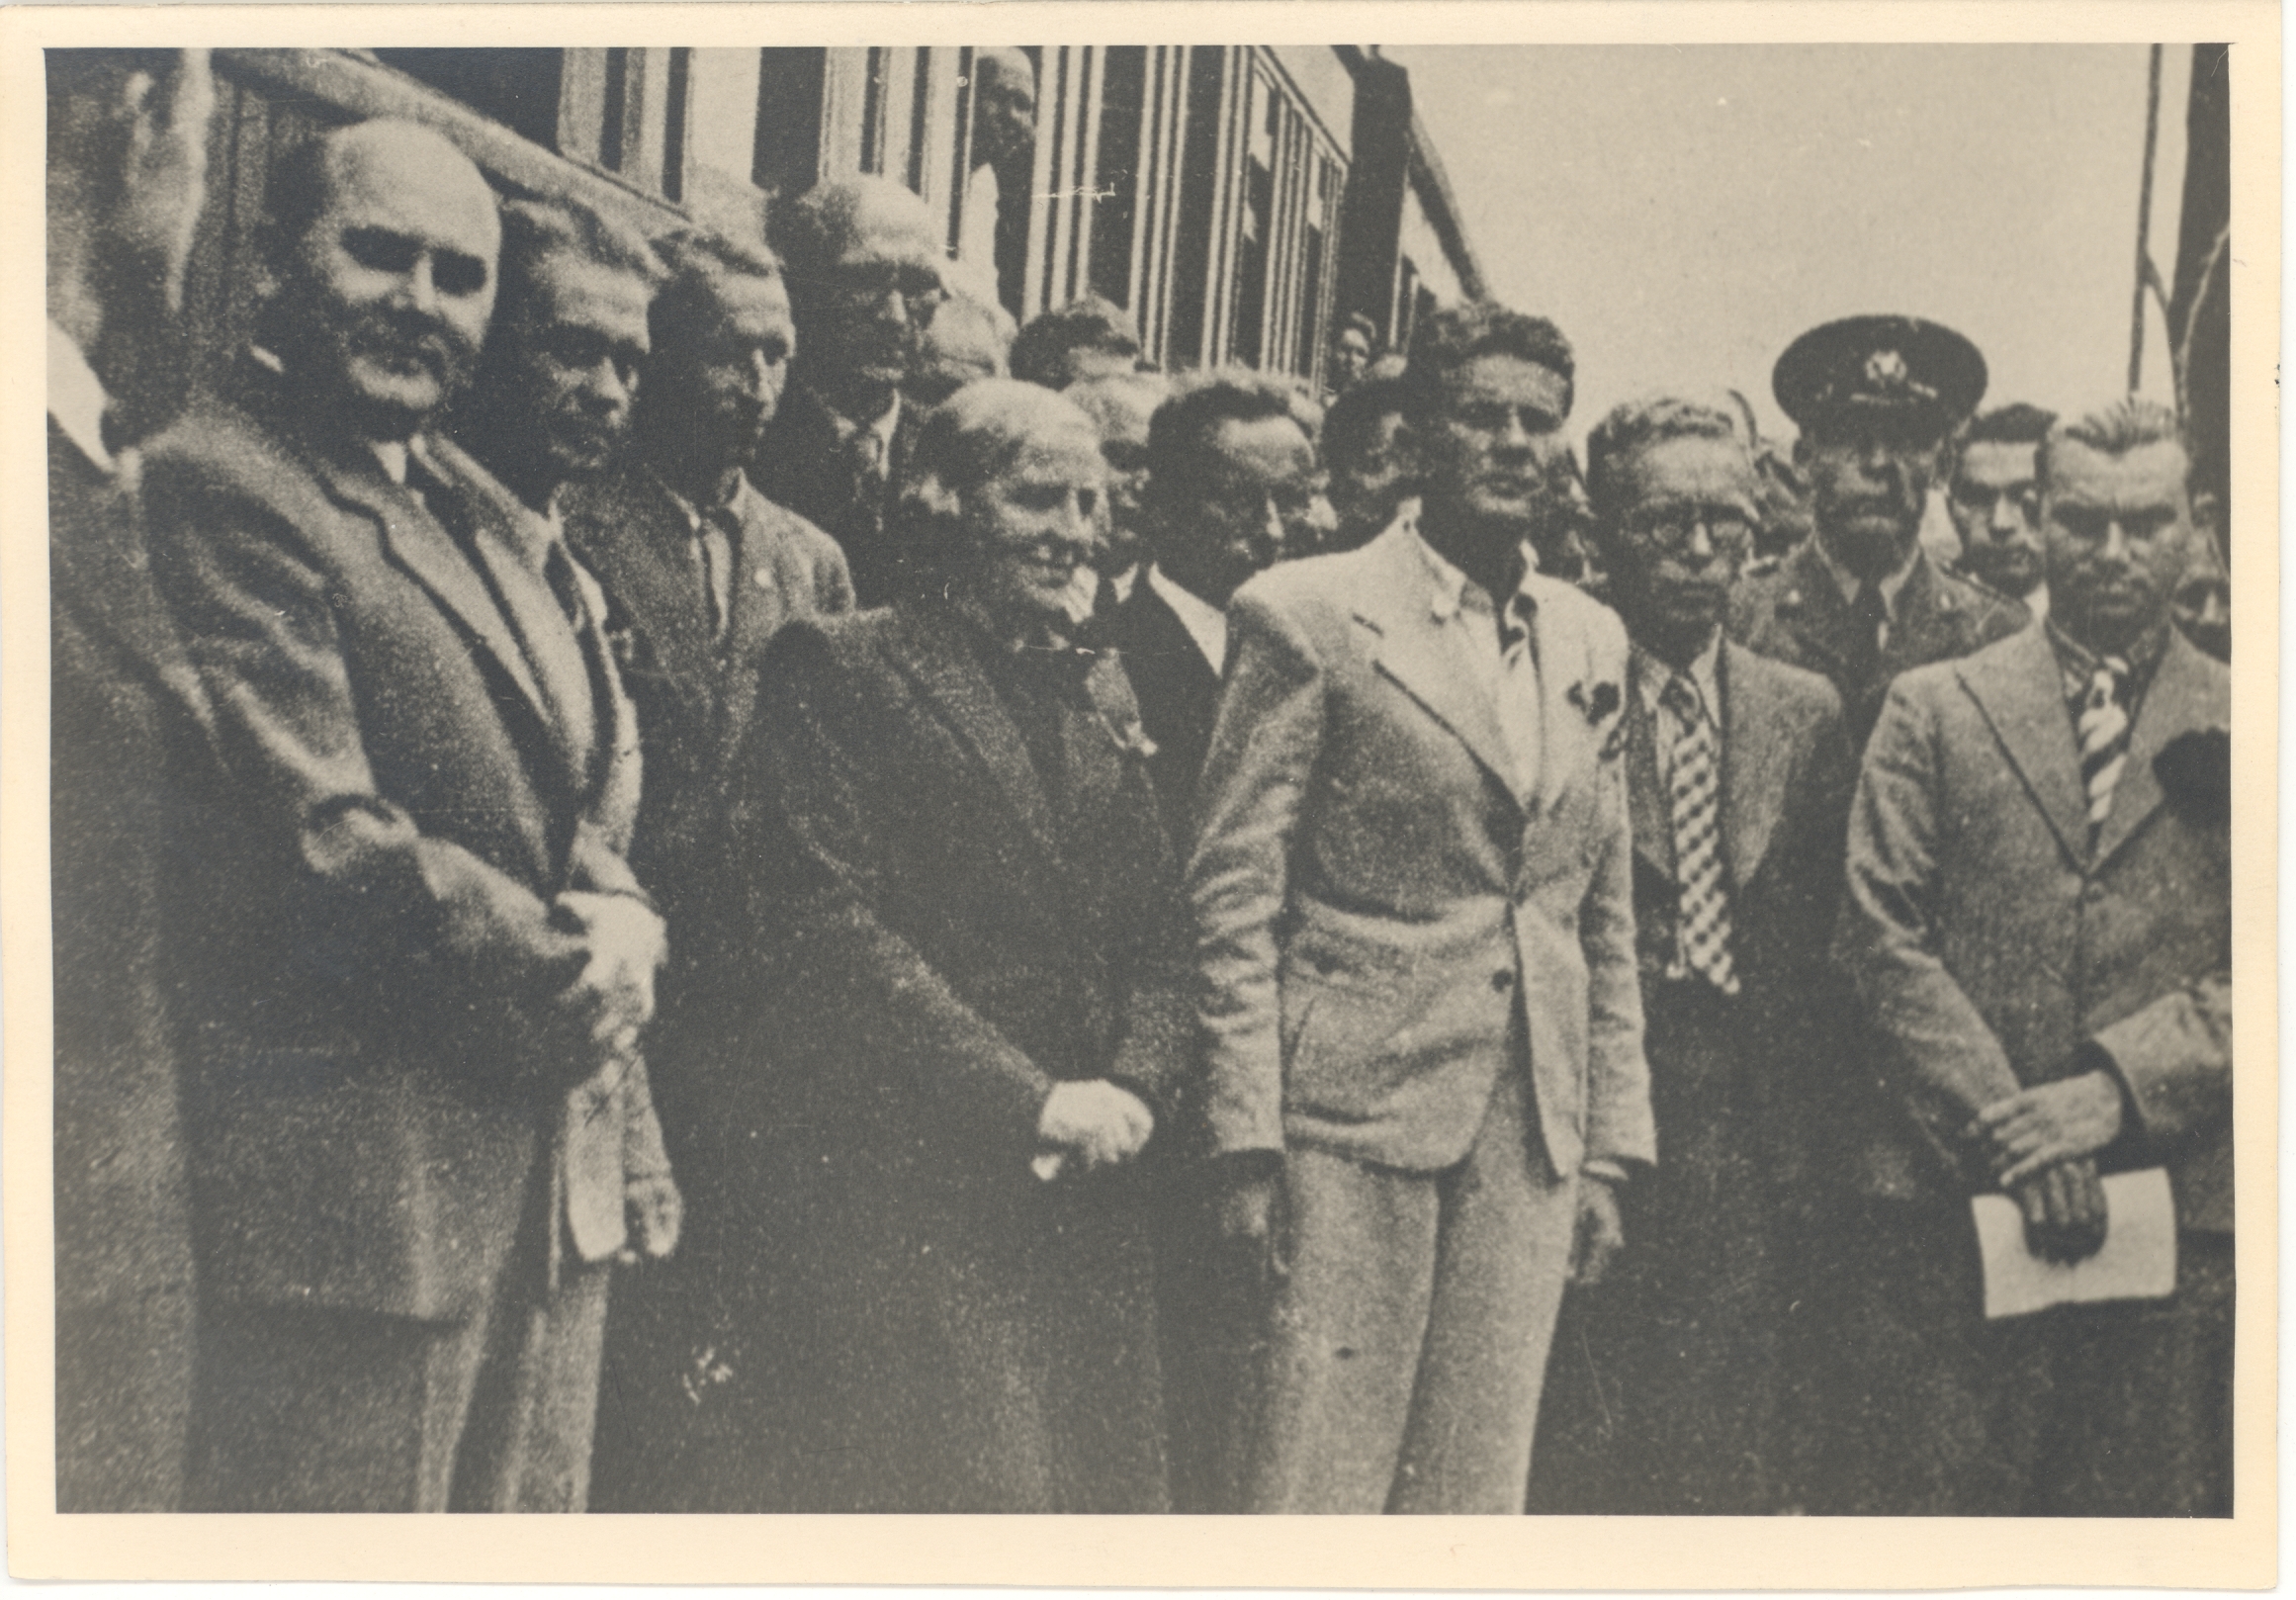 Delegation on the way to Moscow for the adoption of the Soviet Union in 1940.